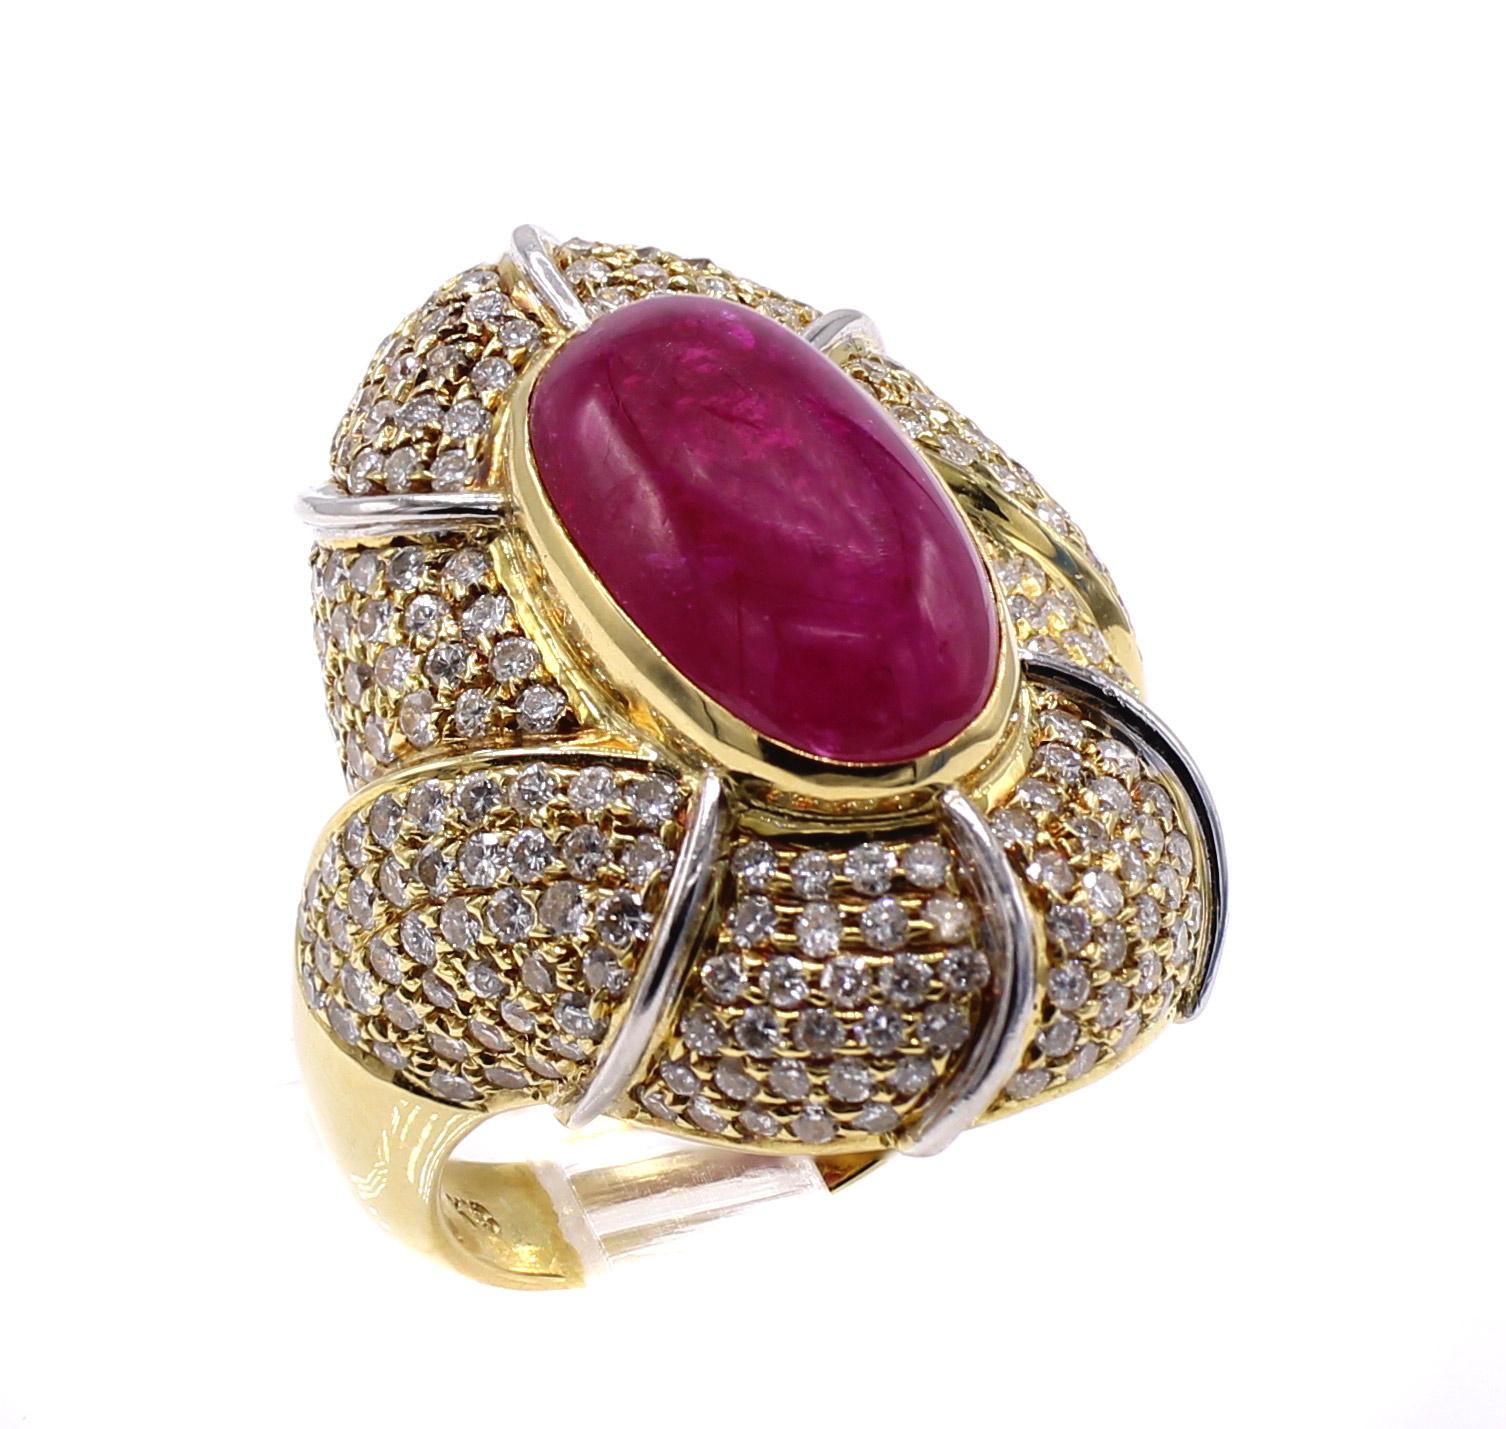 Beautifully designed and masterfully handcrafted this 18 karat yellow gold ring features a pigeon blood red elongated cabochon ruby weighing 7.55 carats, pave set with bright white round brilliant cut diamonds weighing 1.81 carats. The exact weights